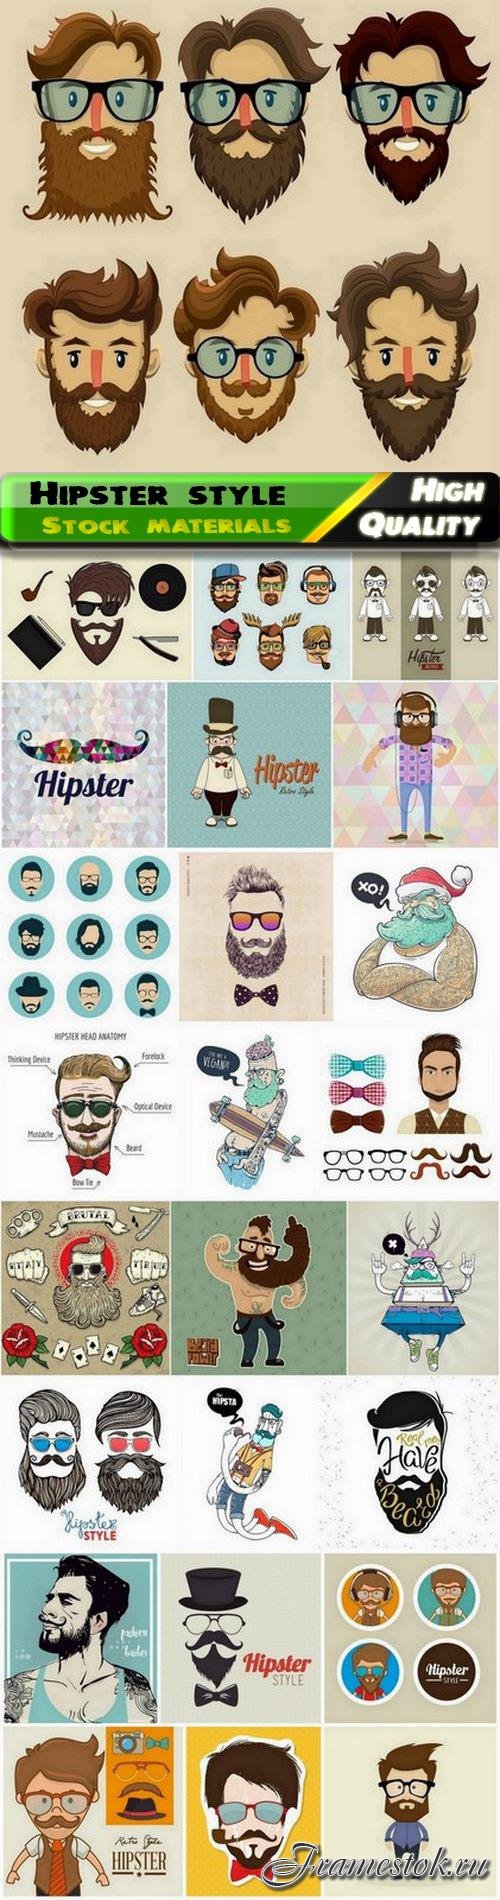 Stylish people and man in hipster style - 25 Eps